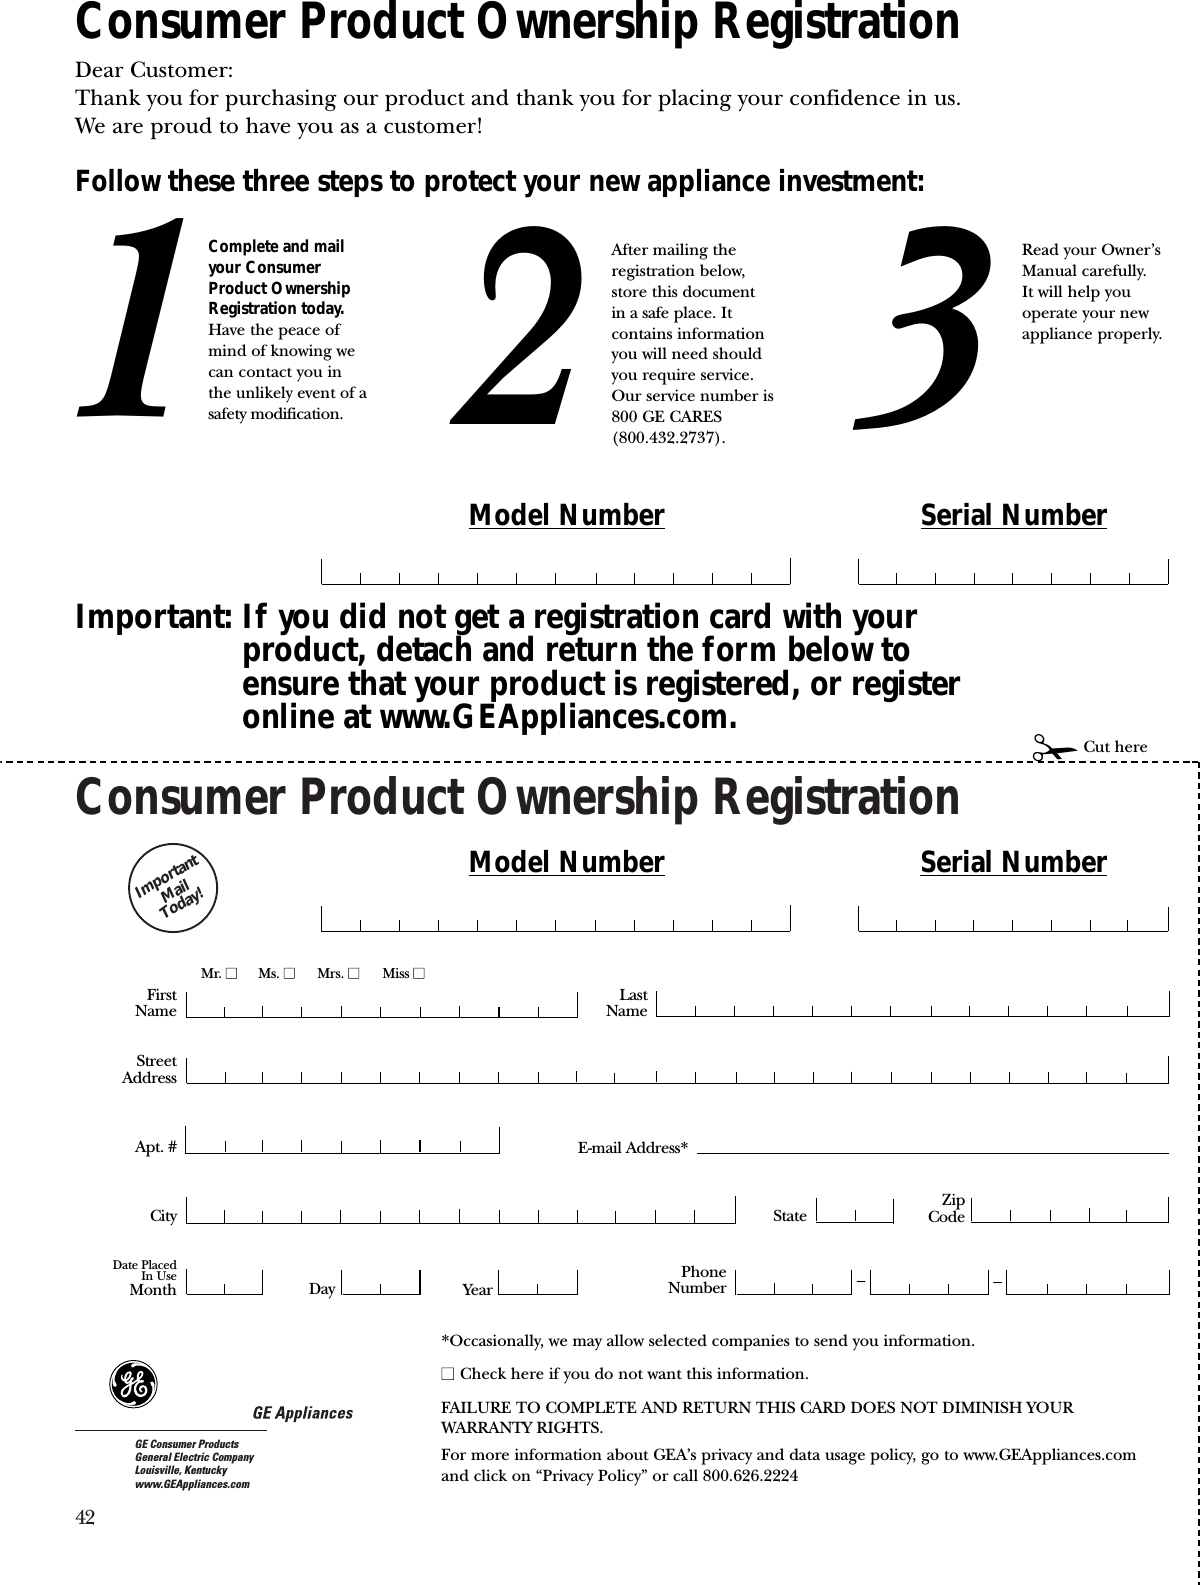 42Consumer Product Ownership RegistrationImportantMail Today!GE Consumer ProductsGeneral Electric CompanyLouisville, Kentuckywww.GEAppliances.comFirstNameMr. ■■Ms. ■■Mrs. ■■Miss ■■StreetAddressCity StateDate PlacedIn UseMonth Day YearZipCodeApt. #LastNamePhoneNumber __Consumer Product Ownership RegistrationDear Customer:Thank you for purchasing our product and thank you for placing your confidence in us. We are proud to have you as a customer!Follow these three steps to protect your new appliance investment:Important: If you did not get a registration card with yourproduct, detach and return the form below toensure that your product is registered, or registeronline at www.GEAppliances.com.123Model Number Serial Number✁Cut hereComplete and mailyour ConsumerProduct OwnershipRegistration today.Have the peace ofmind of knowing wecan contact you inthe unlikely event of asafety modification.After mailing theregistration below, store this document in a safe place. Itcontains informationyou will need should you require service. Our service number is800 GE CARES (800.432.2737).Read your Owner’sManual carefully.It will help youoperate your newappliance properly. Model Number Serial NumberE-mail Address**Occasionally, we may allow selected companies to send you information.■■ Check here if you do not want this information.FAILURE TO COMPLETE AND RETURN THIS CARD DOES NOT DIMINISH YOUR WARRANTY RIGHTS.For more information about GEA’s privacy and data usage policy, go to www.GEAppliances.com and click on “Privacy Policy” or call 800.626.2224